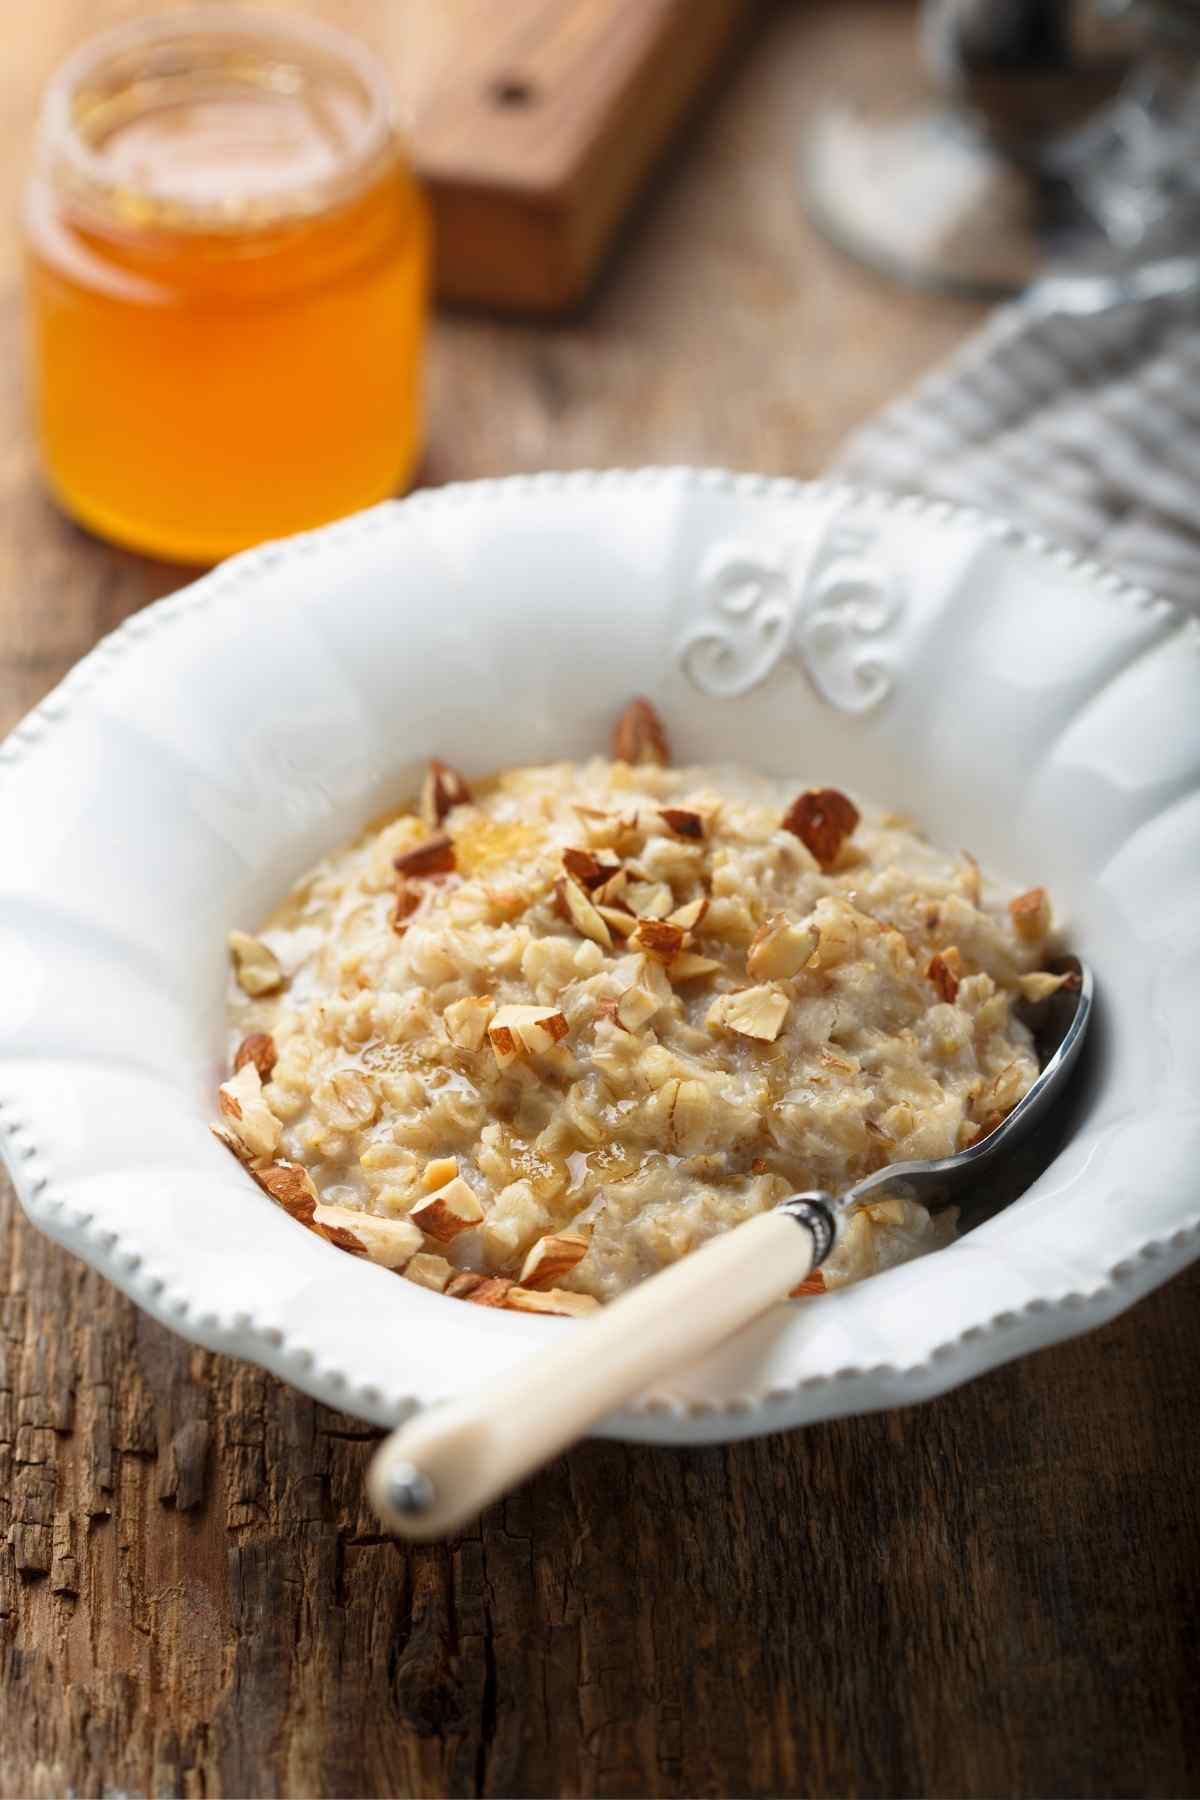 Porridge and oatmeal are both popular breakfast meals, but can you tell the difference between them? Which is healthier and which contains more dietary fiber? In this article, we compare the two to discover which morning dish reigns supreme.